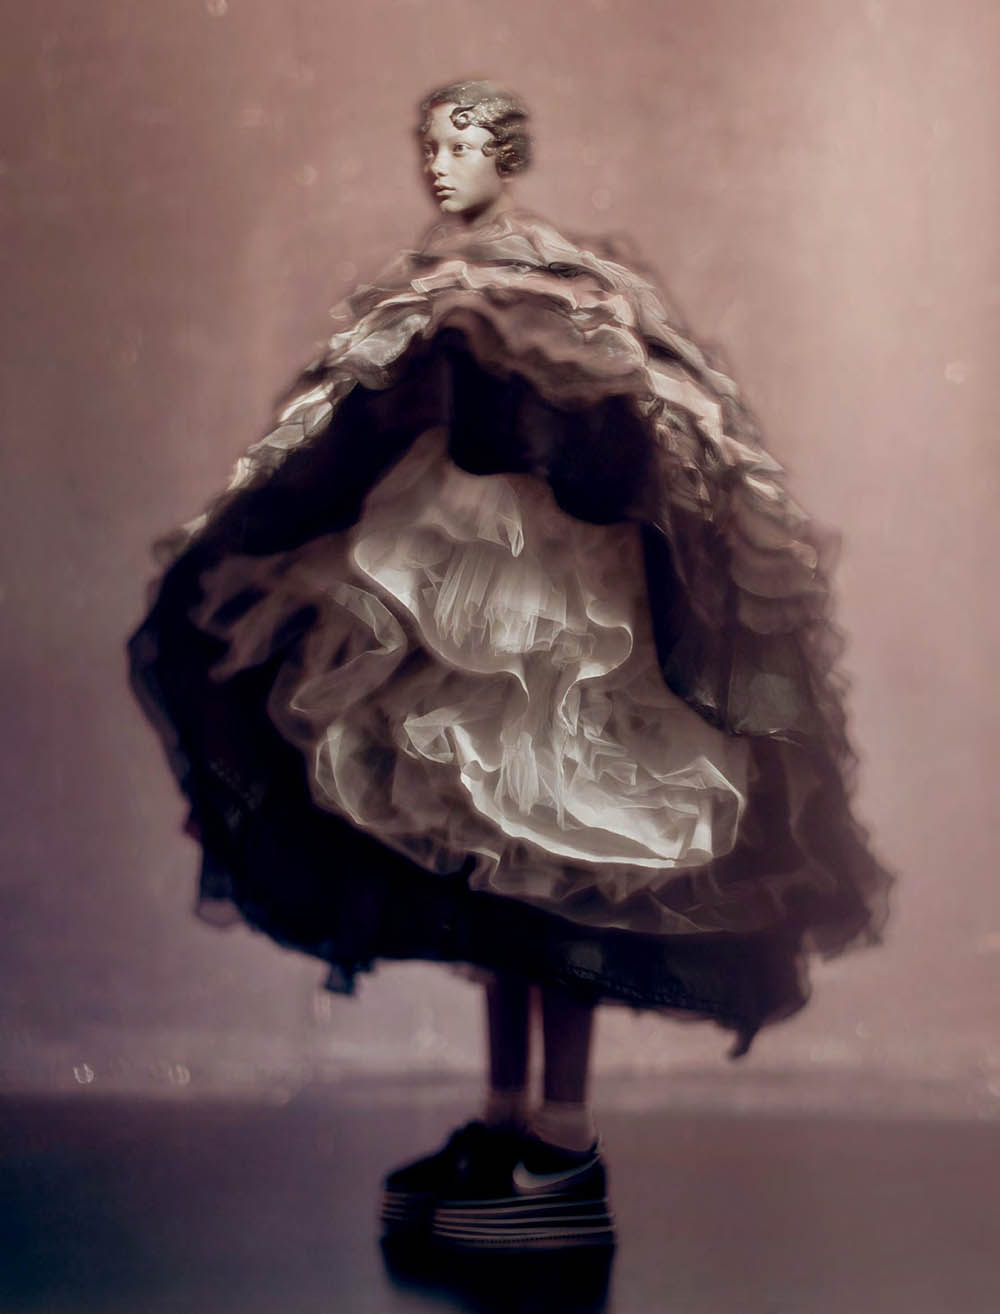 Sara Grace Wallerstedt by Paolo Roversi for Dazed Magazine Fall 2018